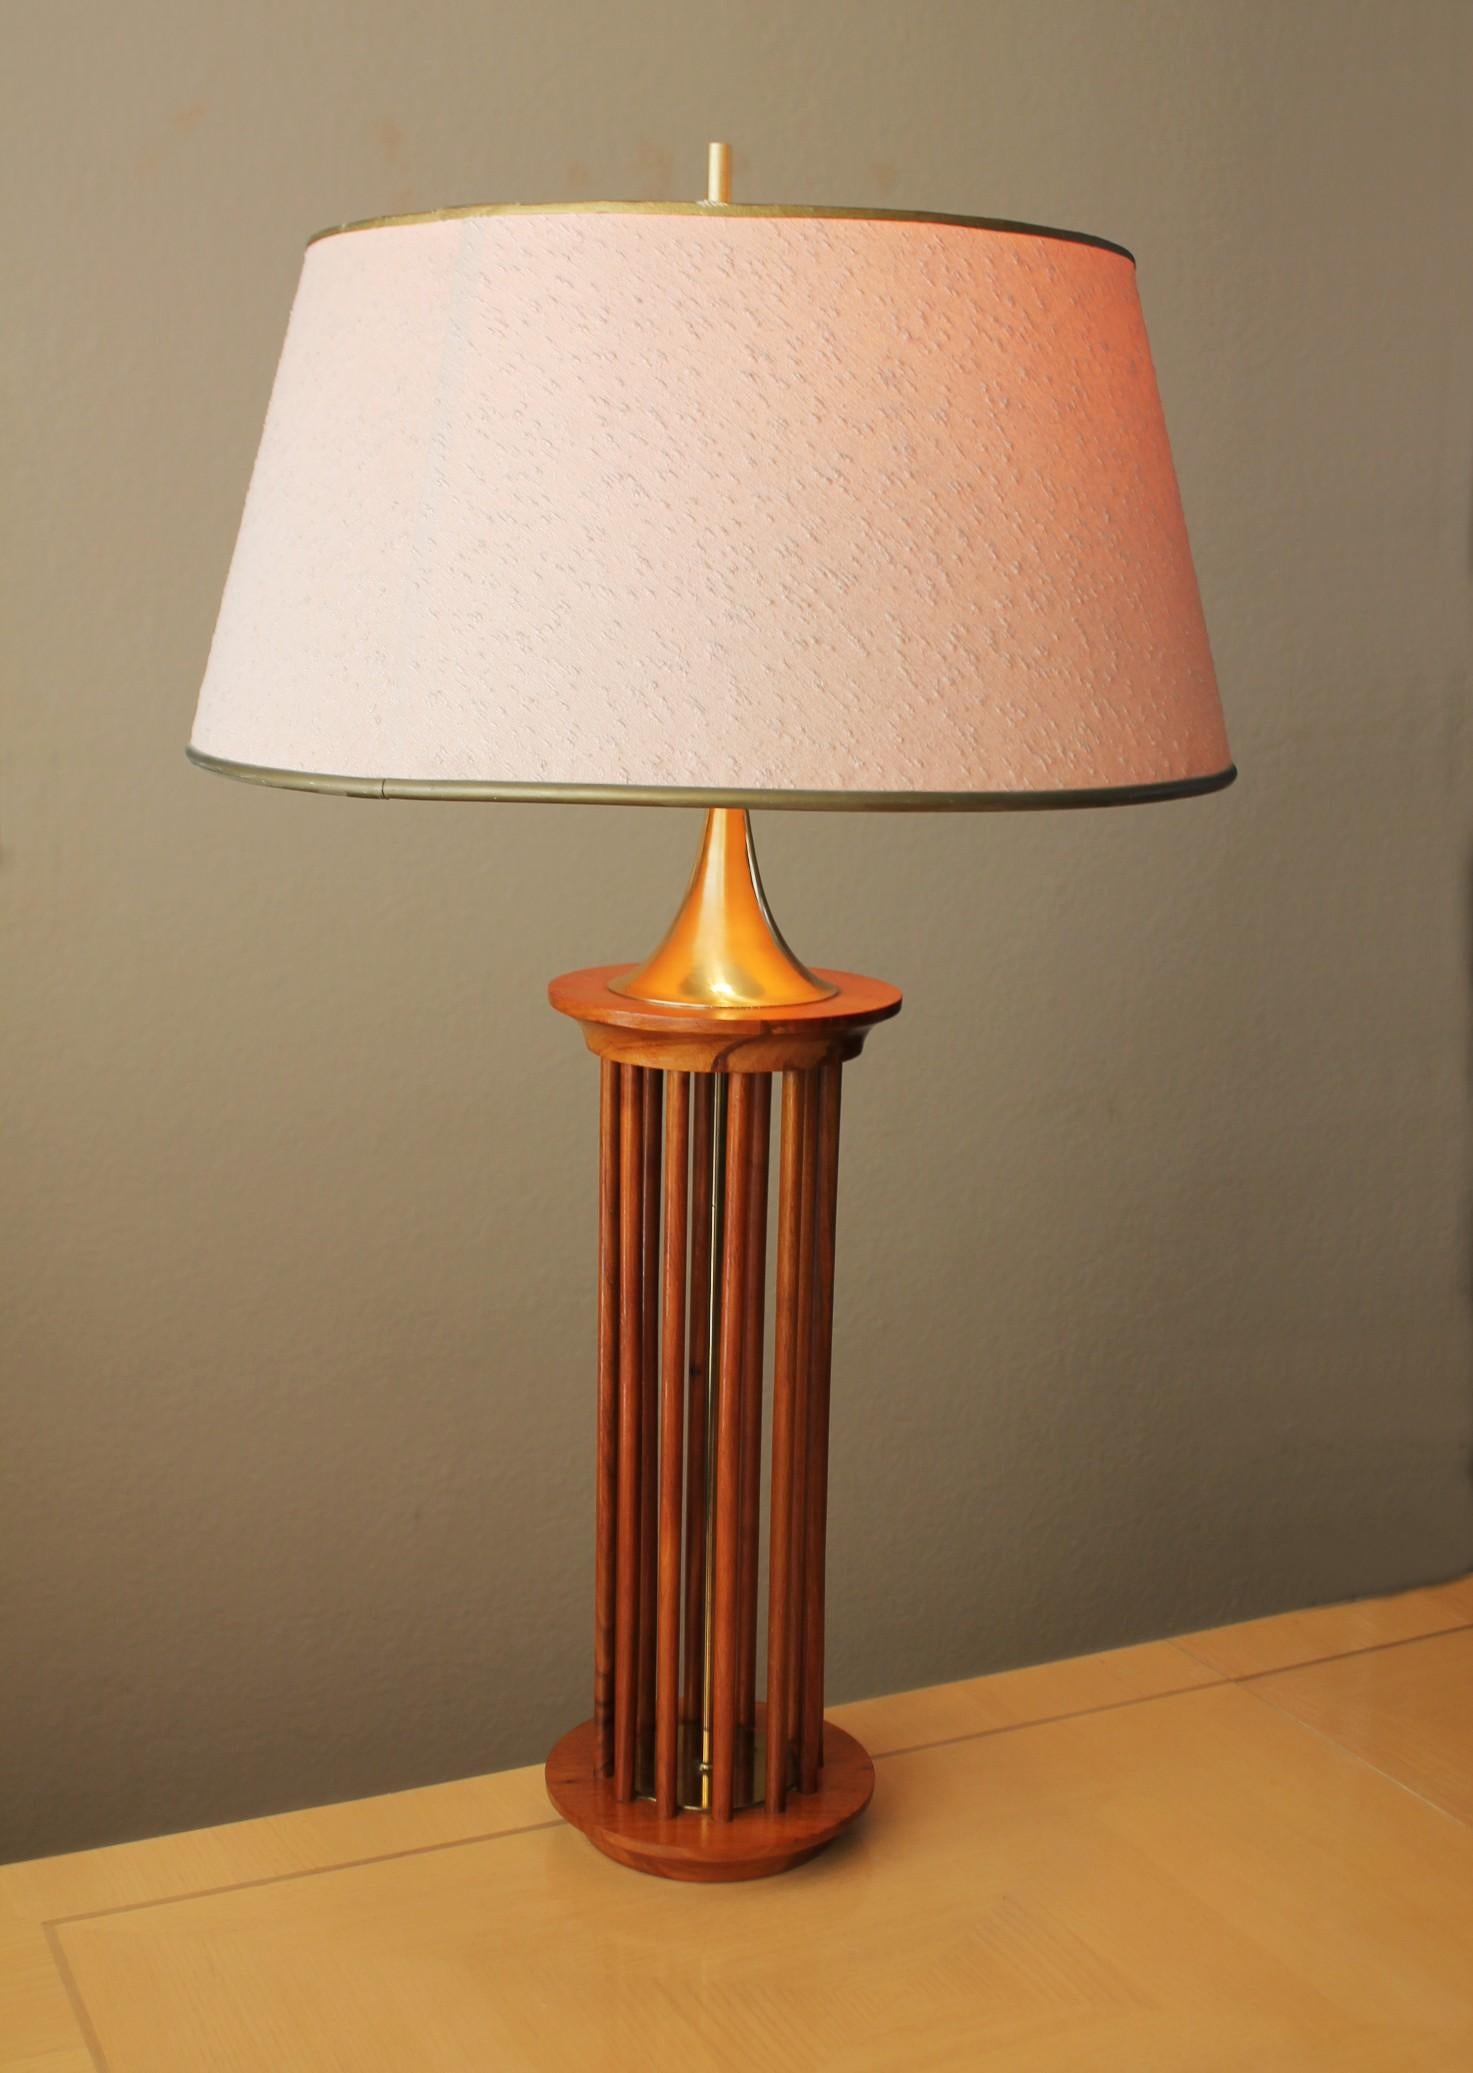 Modeline Danish Modern
Teak Table Lamp
Brass Accents

Hand-carved & Hand-crafted!

Exquisite!

Magnificent 20